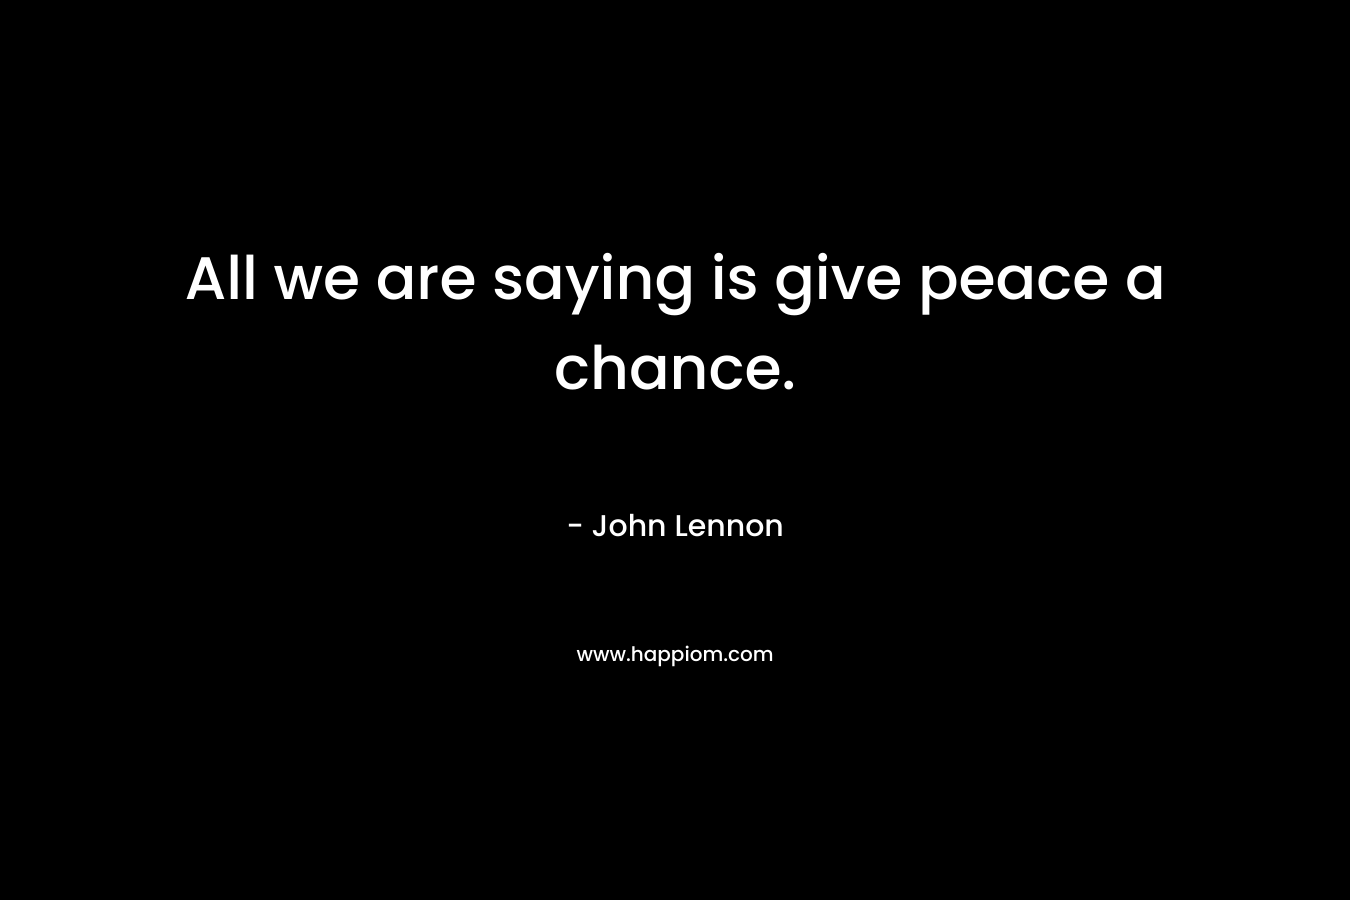 All we are saying is give peace a chance.